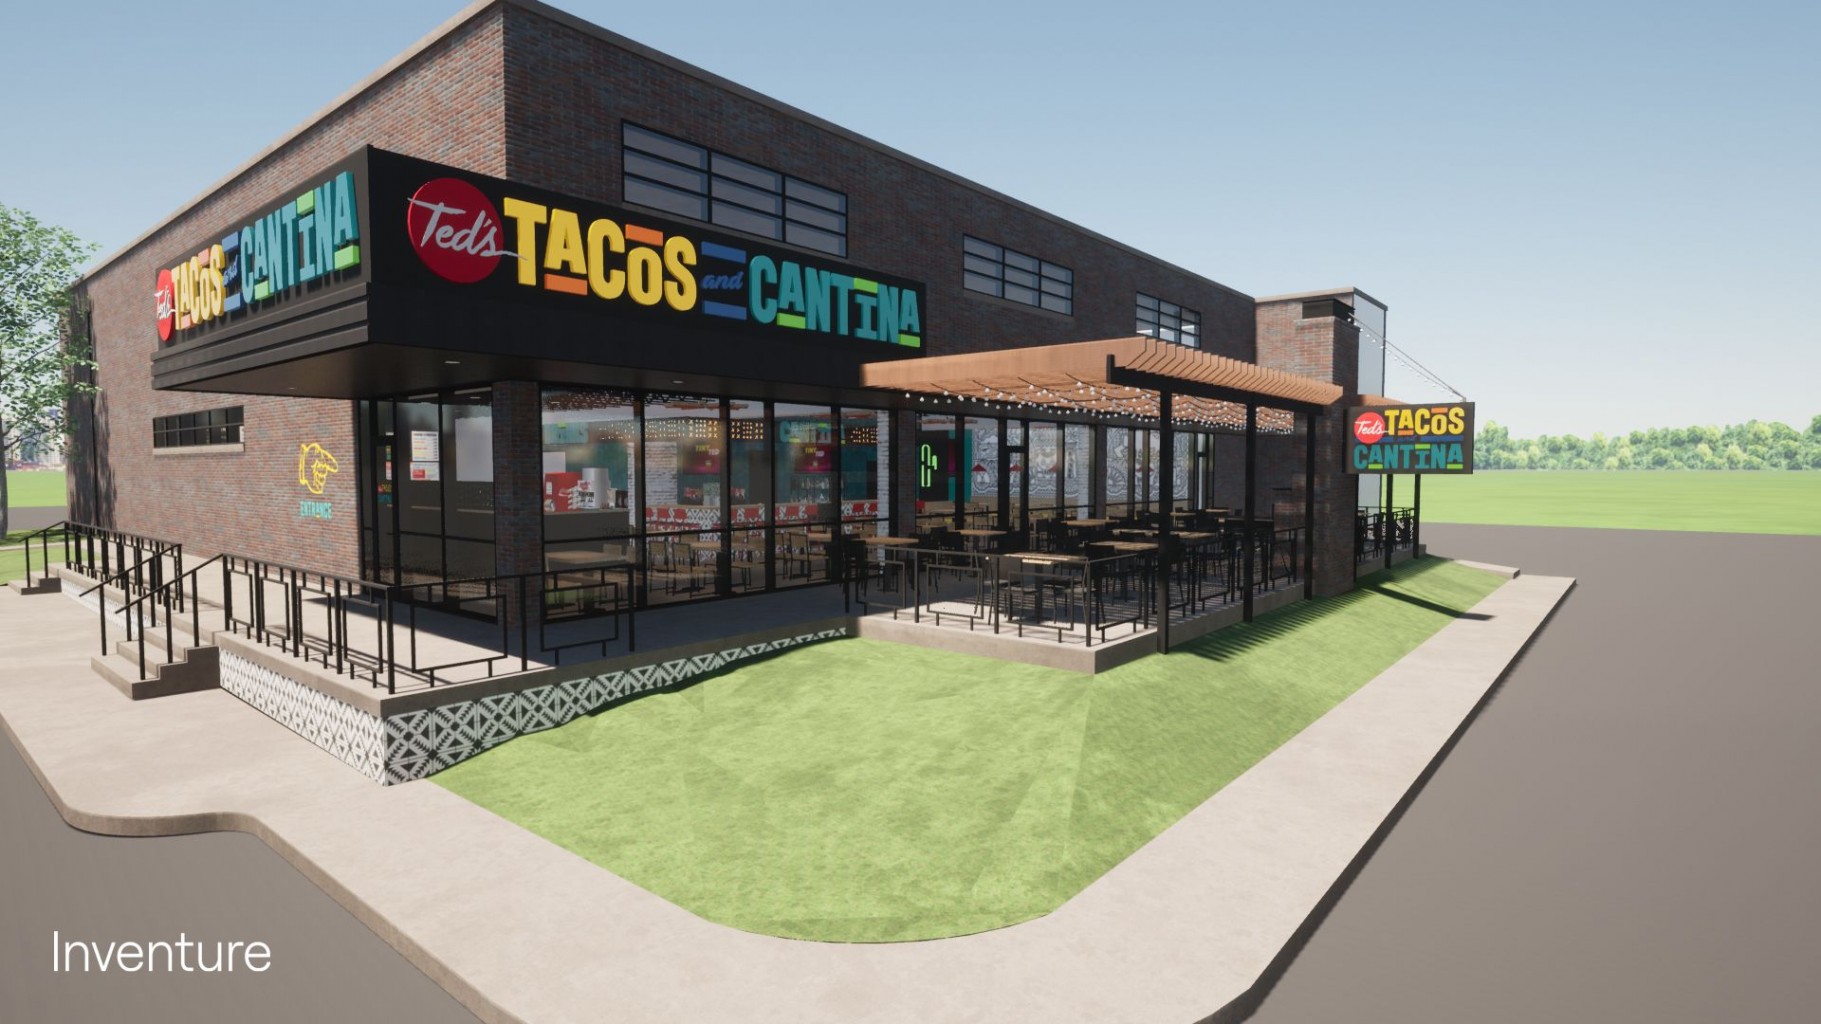 New Taco Cantina Opening in Uptown Oklahoma City: Ted’s Tacos and Cantina set to open on November 2